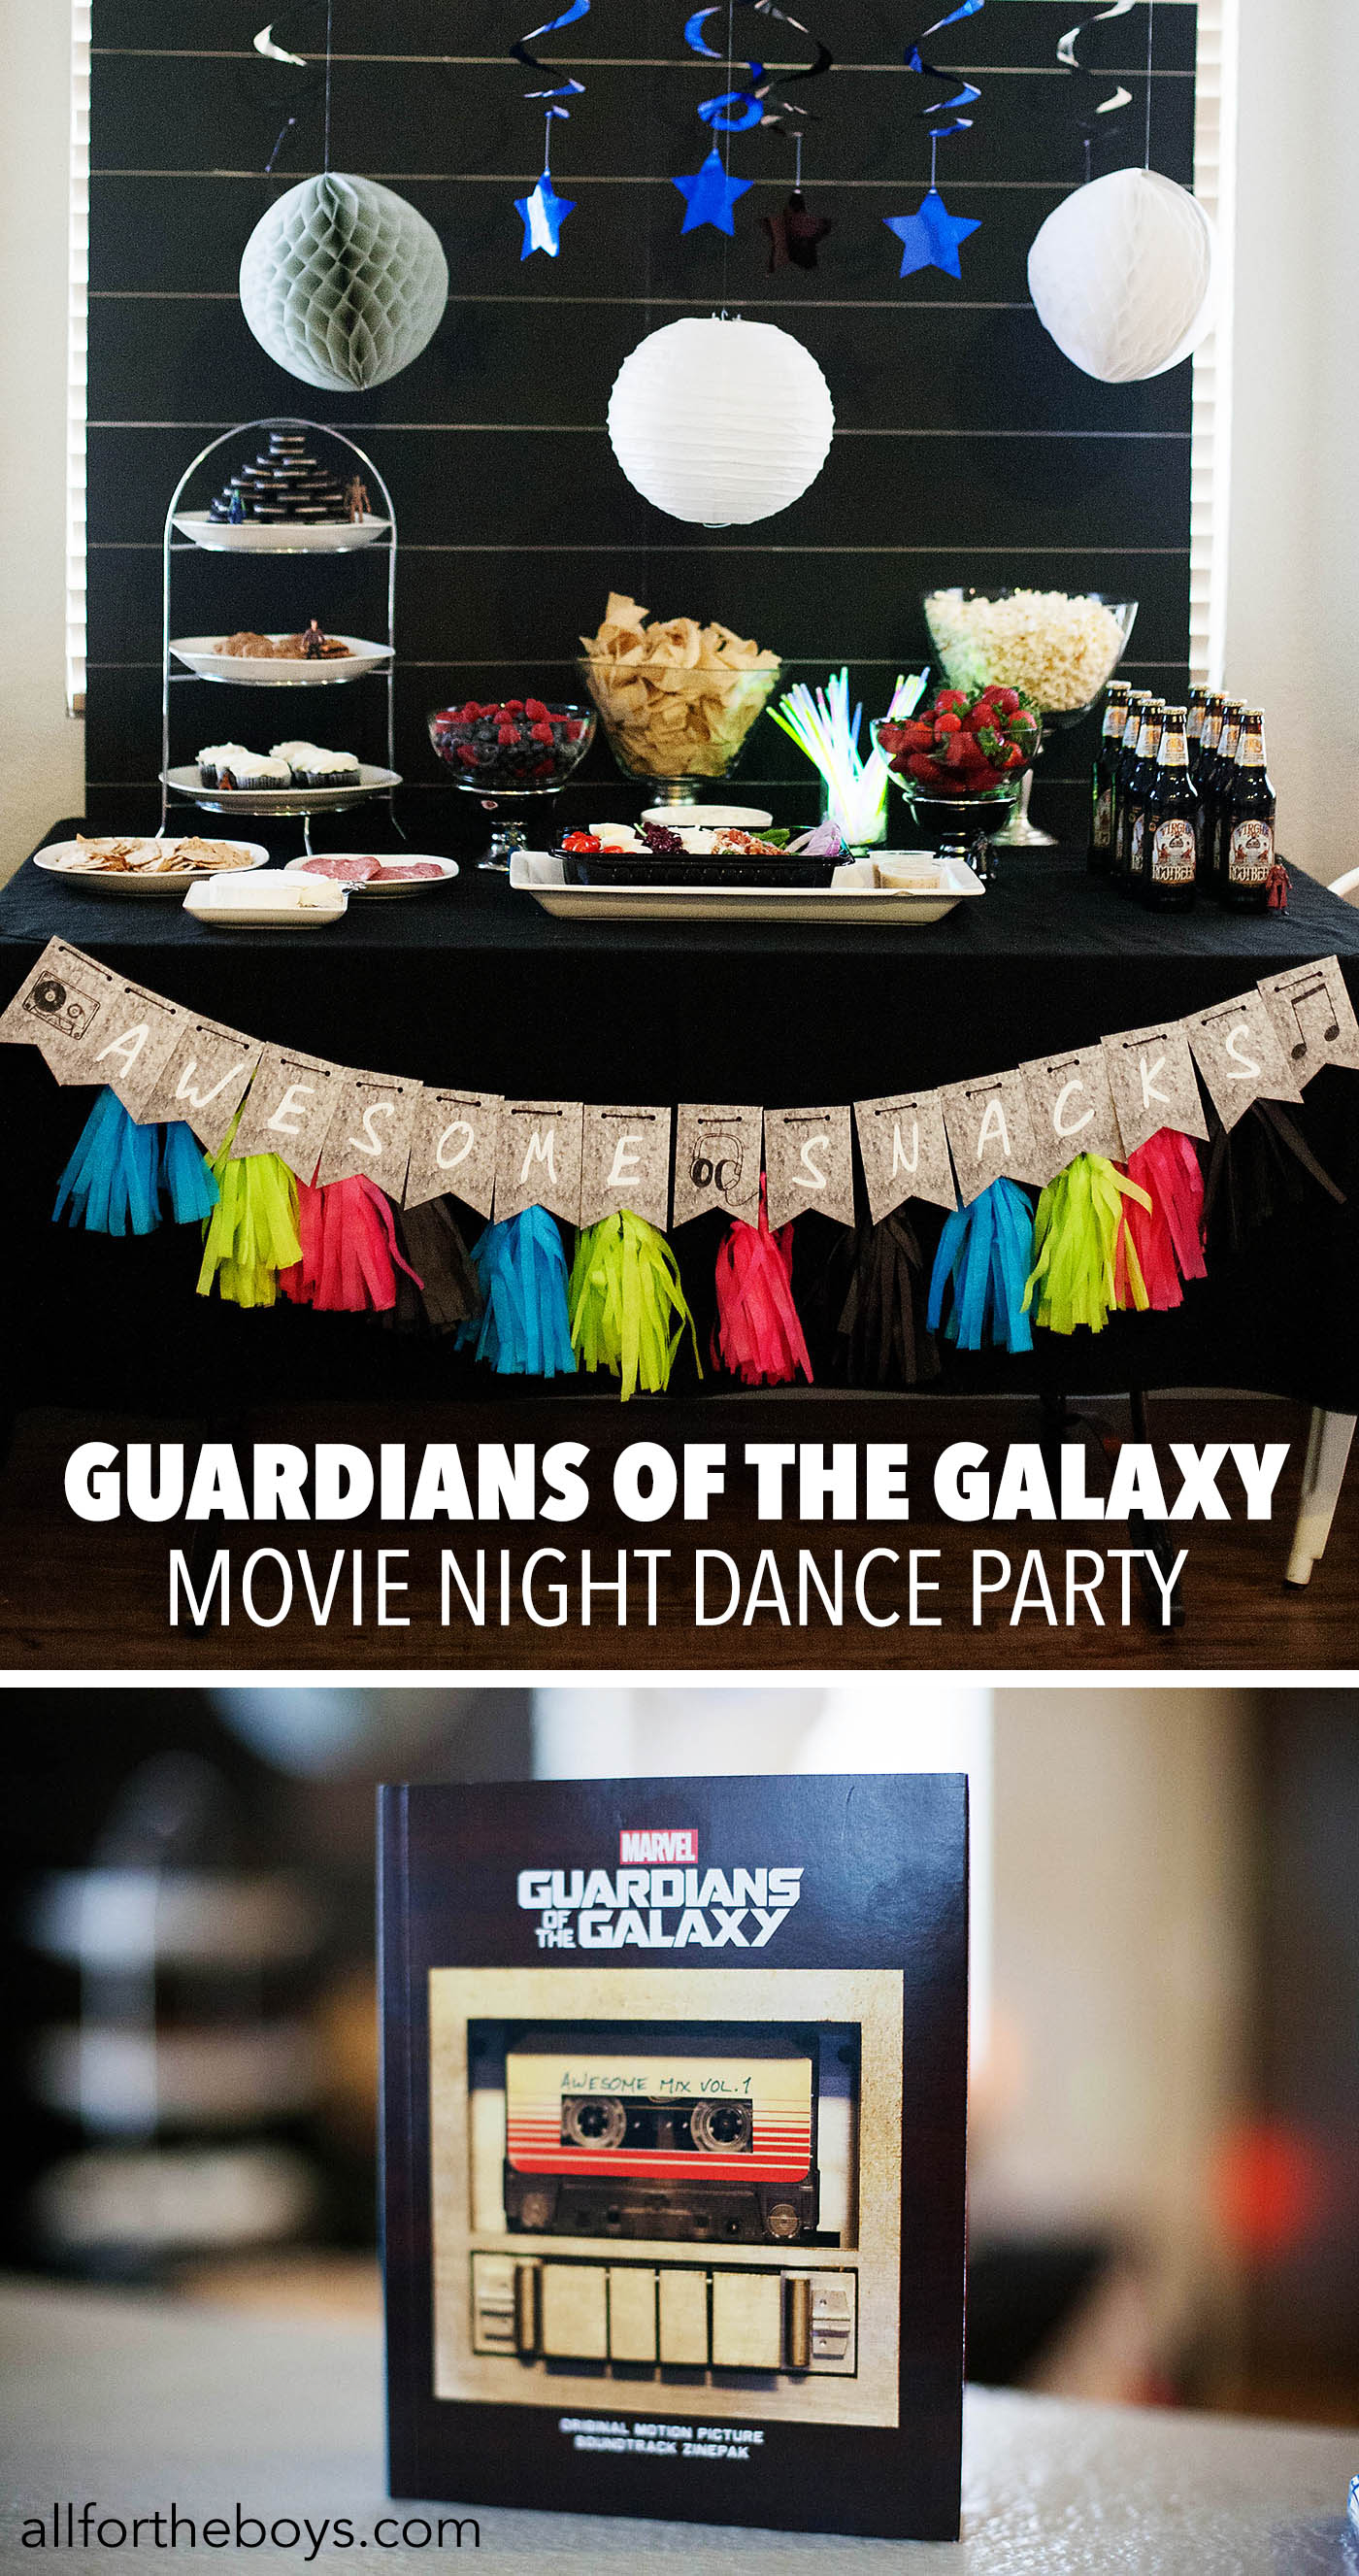 Guardians of the Galaxy movie night dance party